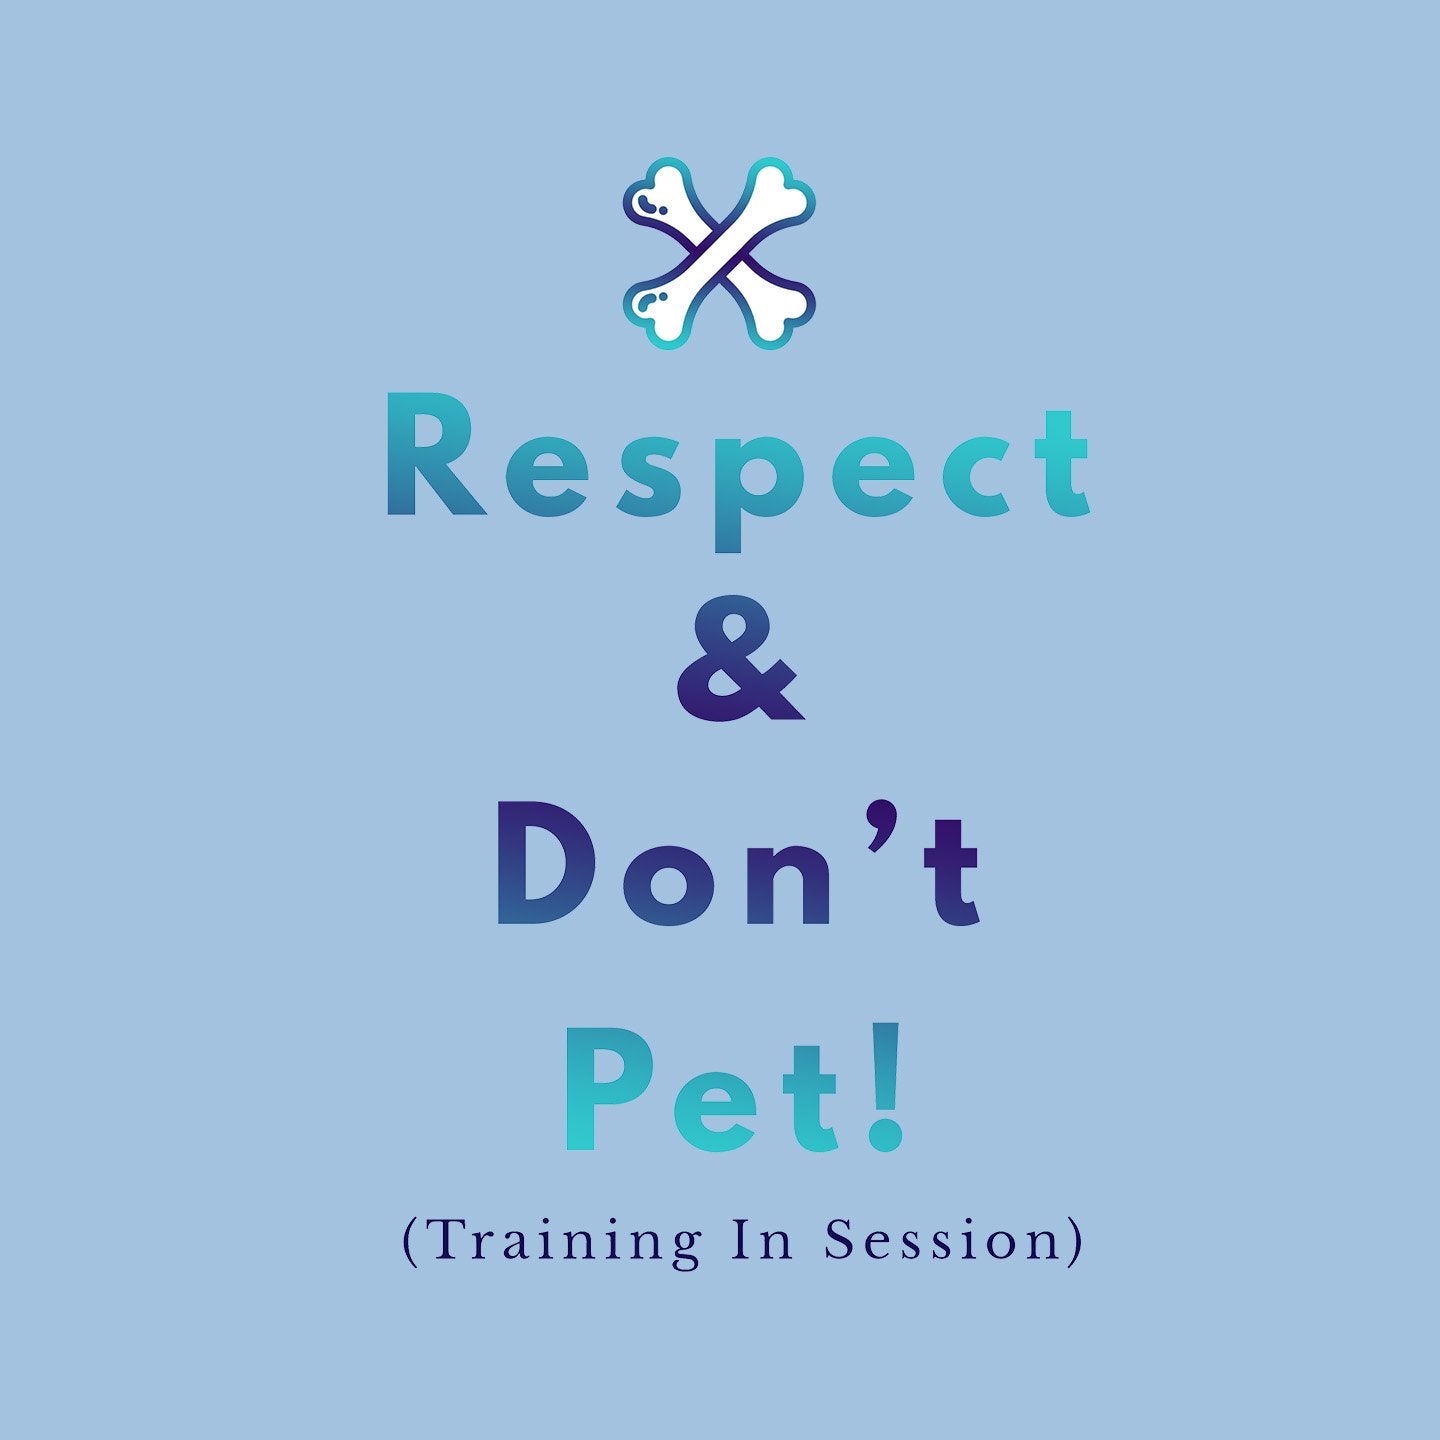 Service Dog Training Respect and Don't Pet - Women's Fitted T-Shirt